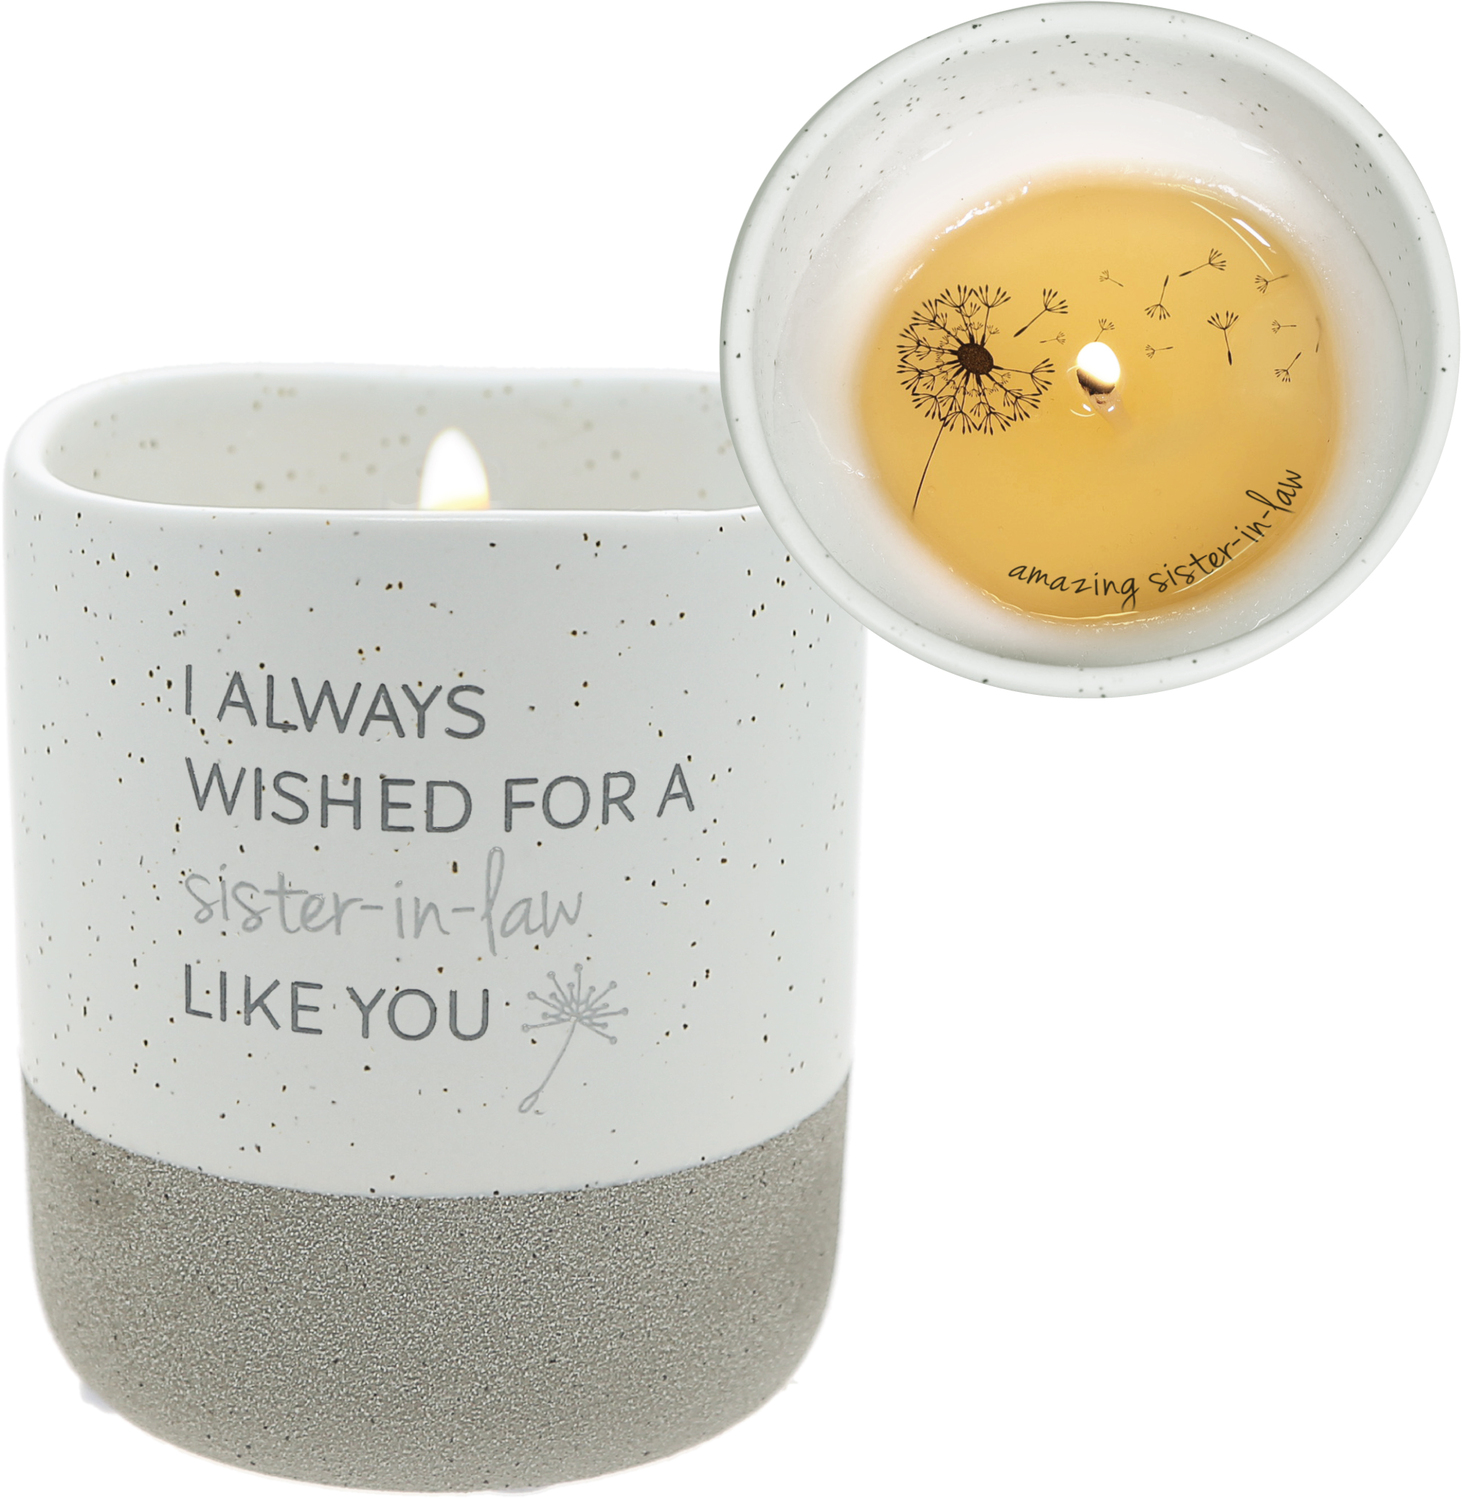 Sister-In-Law Like You by I Always Wished - Sister-In-Law Like You - 10 oz - 100% Soy Wax Reveal Candle
Scent: Tranquility